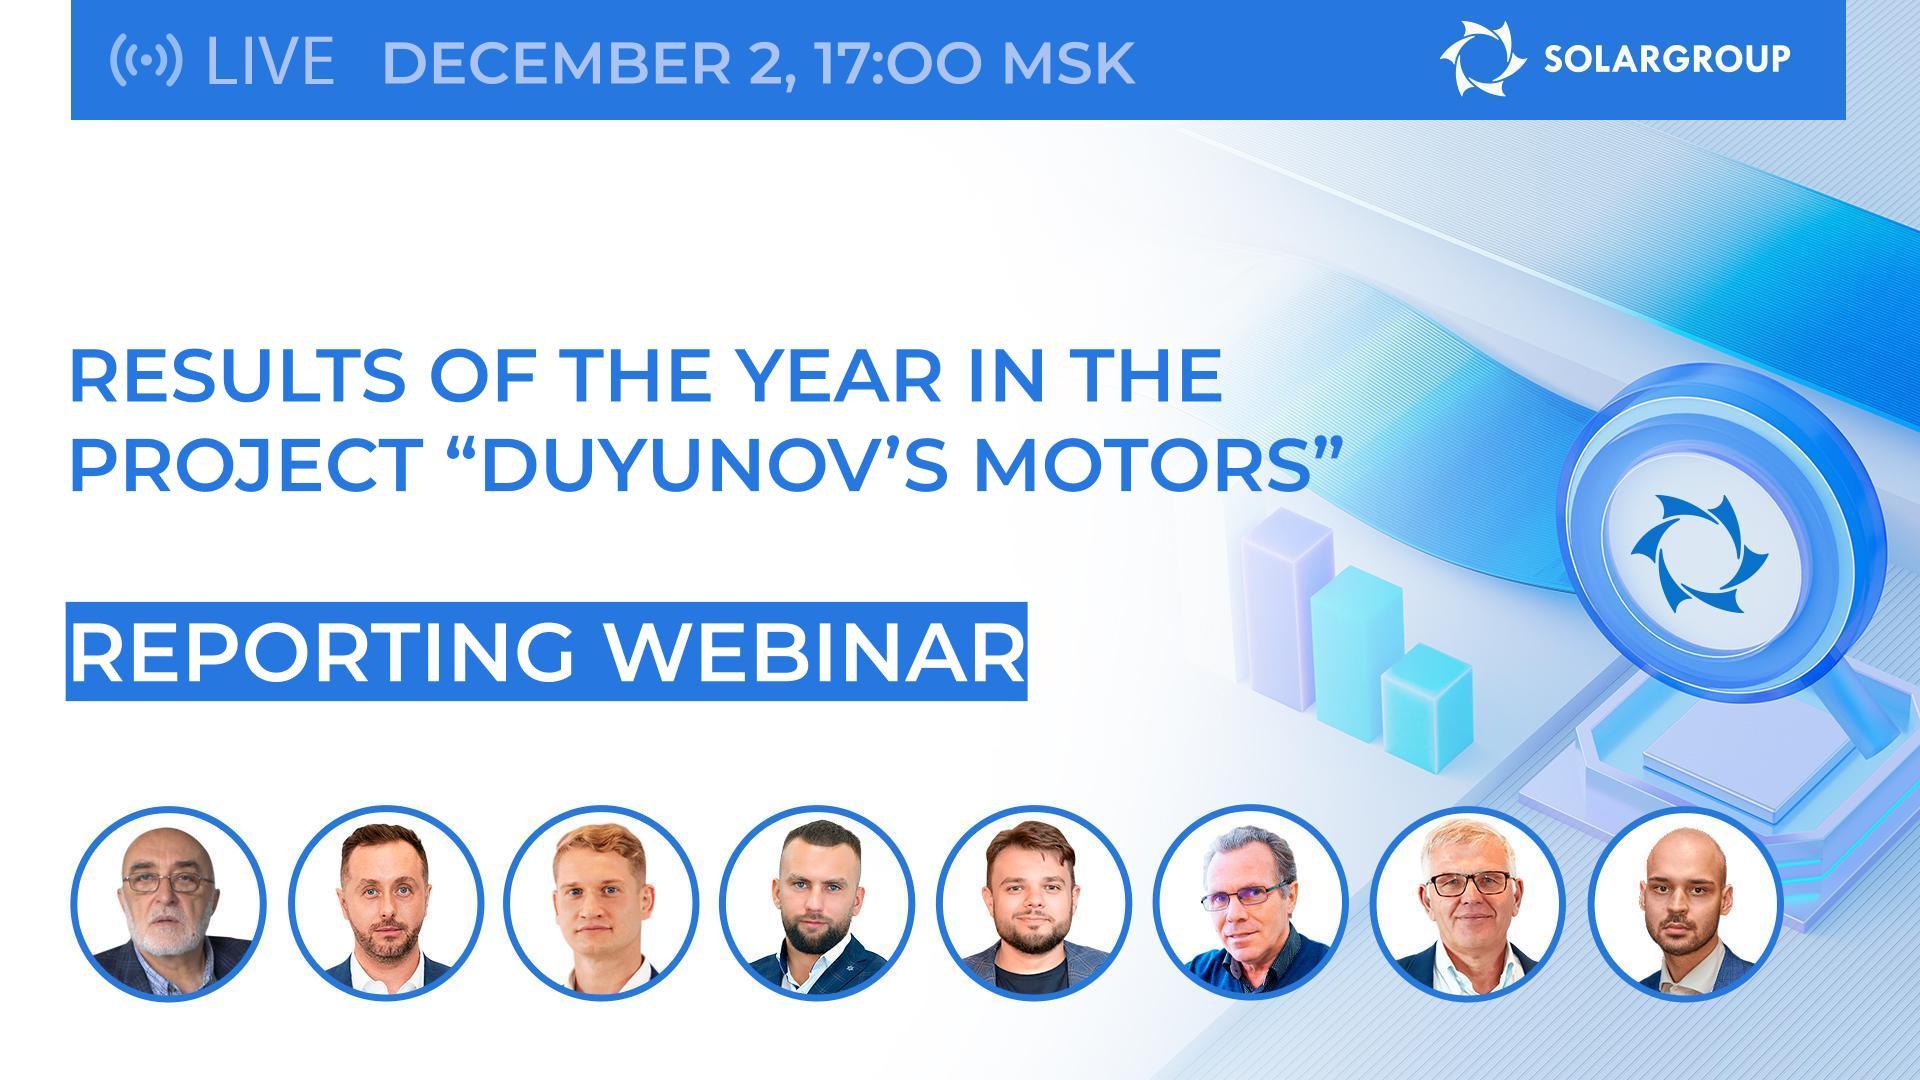 Results of the year in the project "Duyunov's motors"